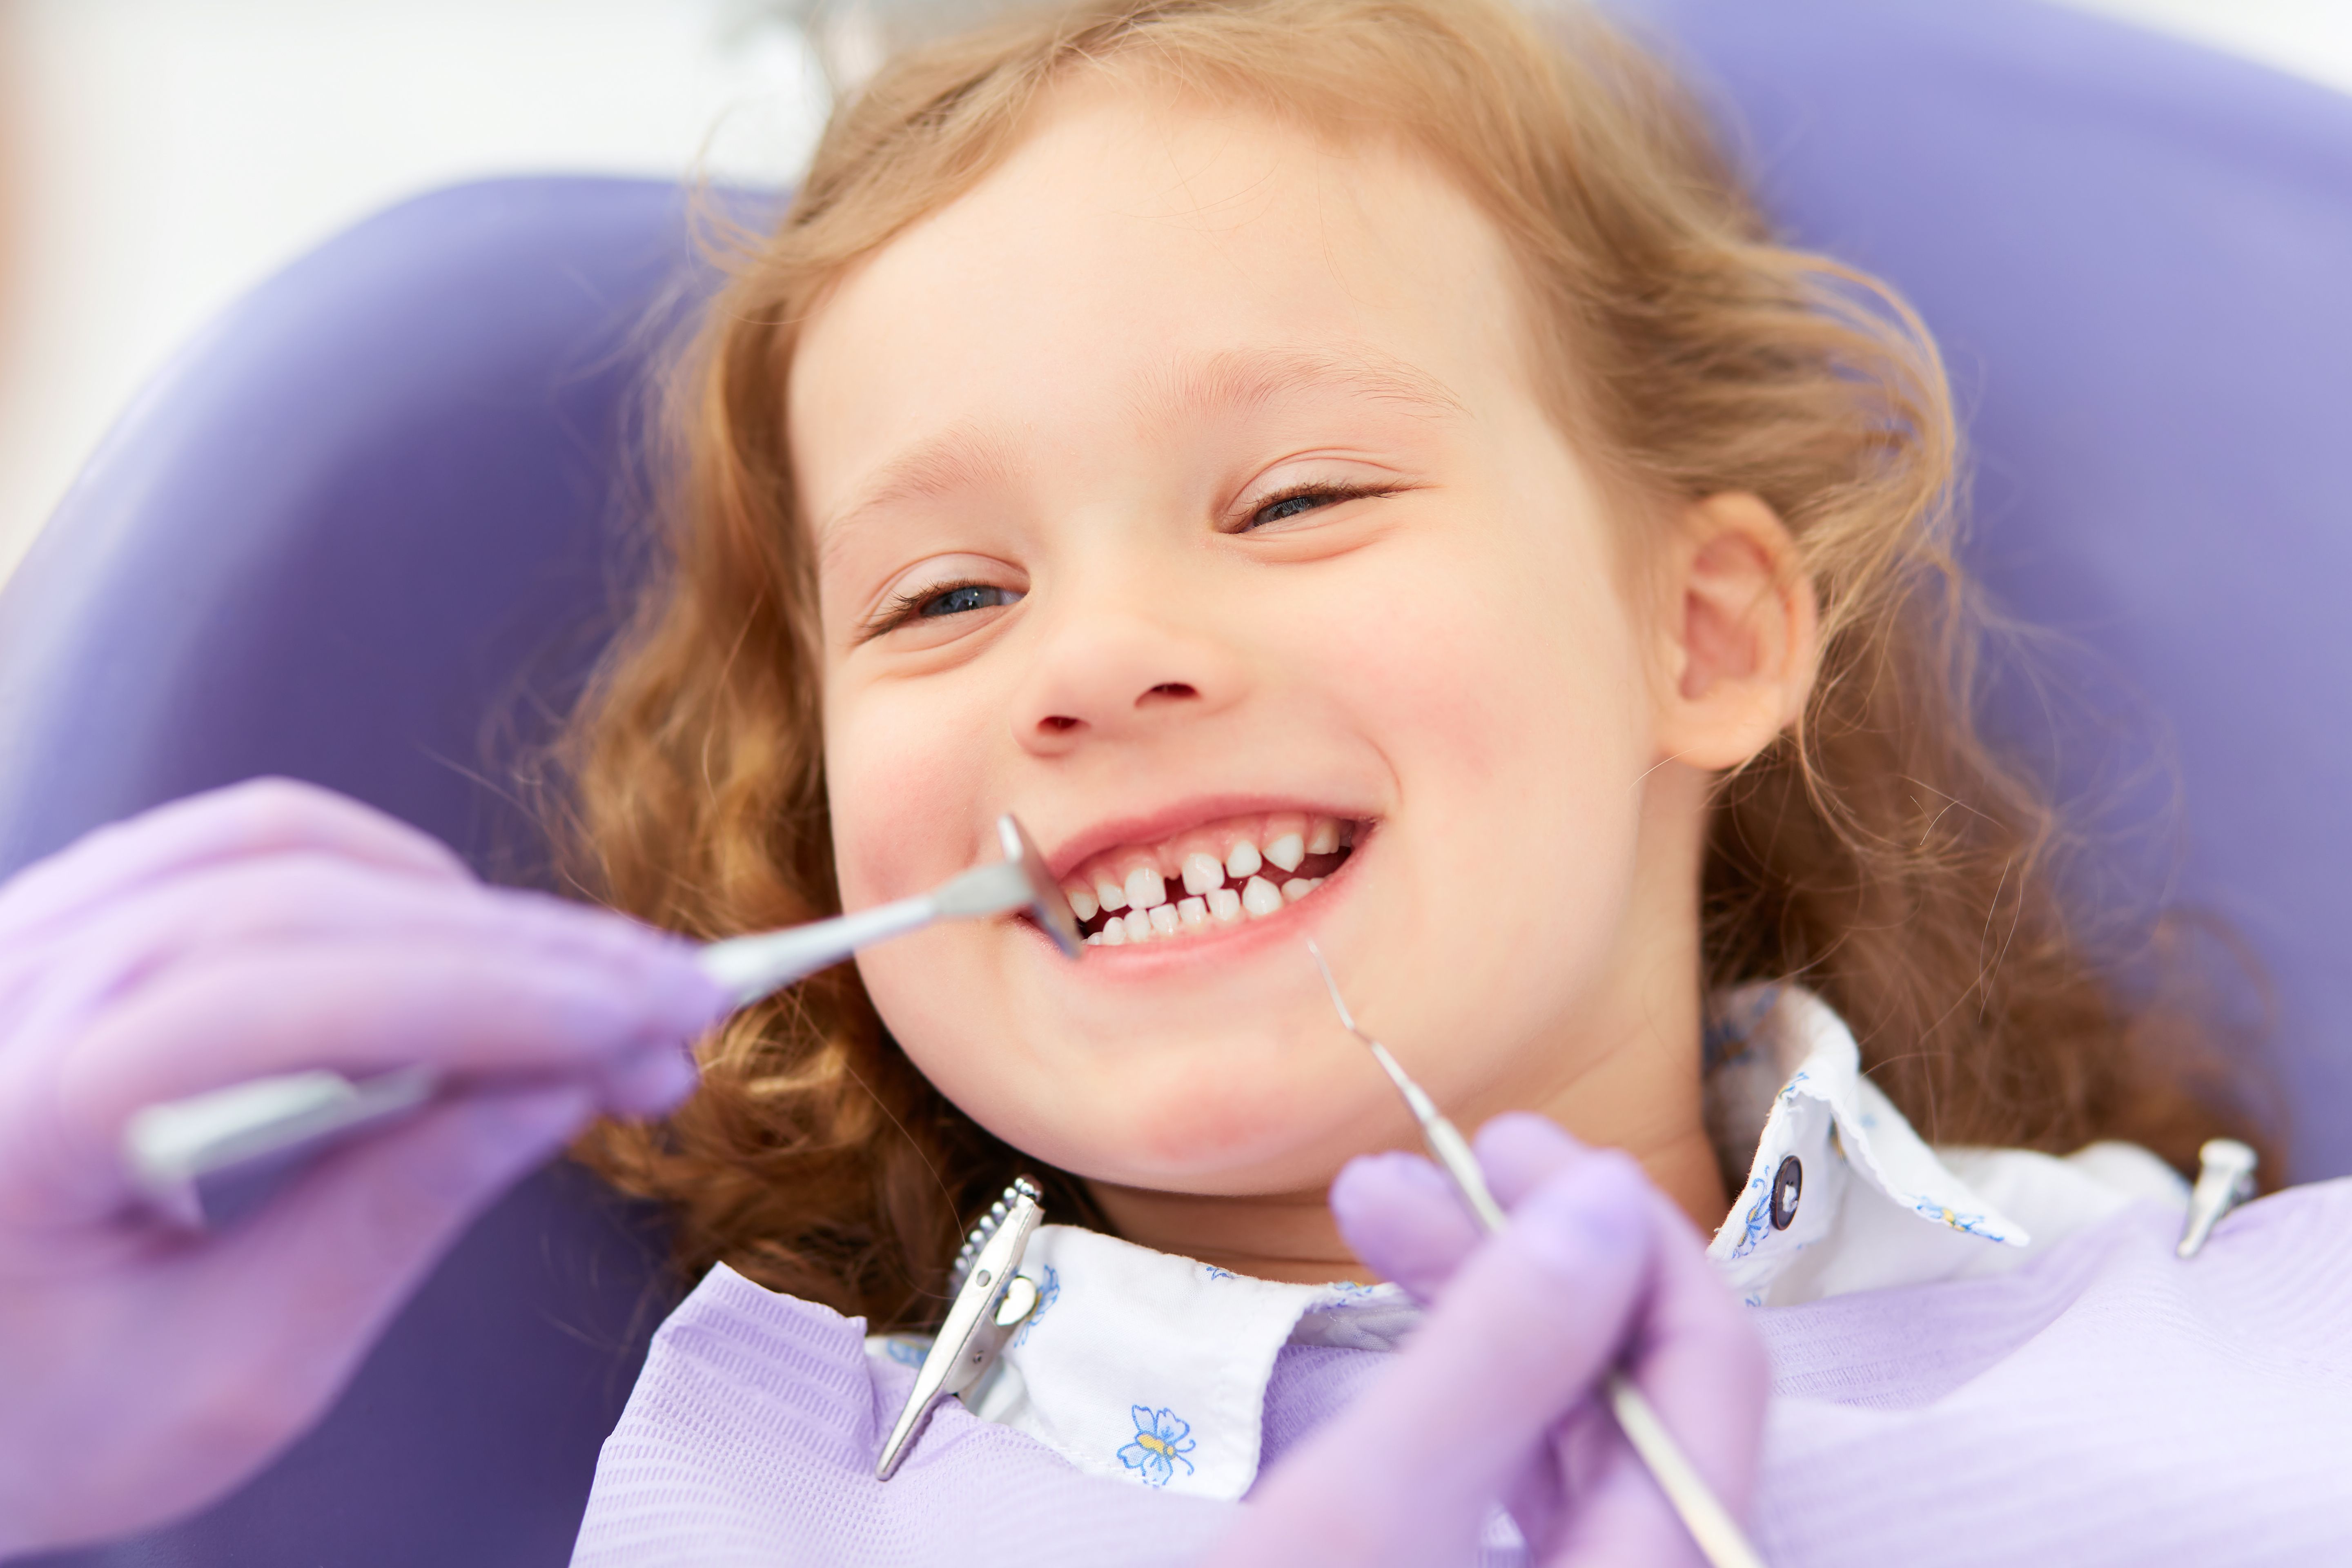 What are the Benefits of Pediatric IV Sedation?